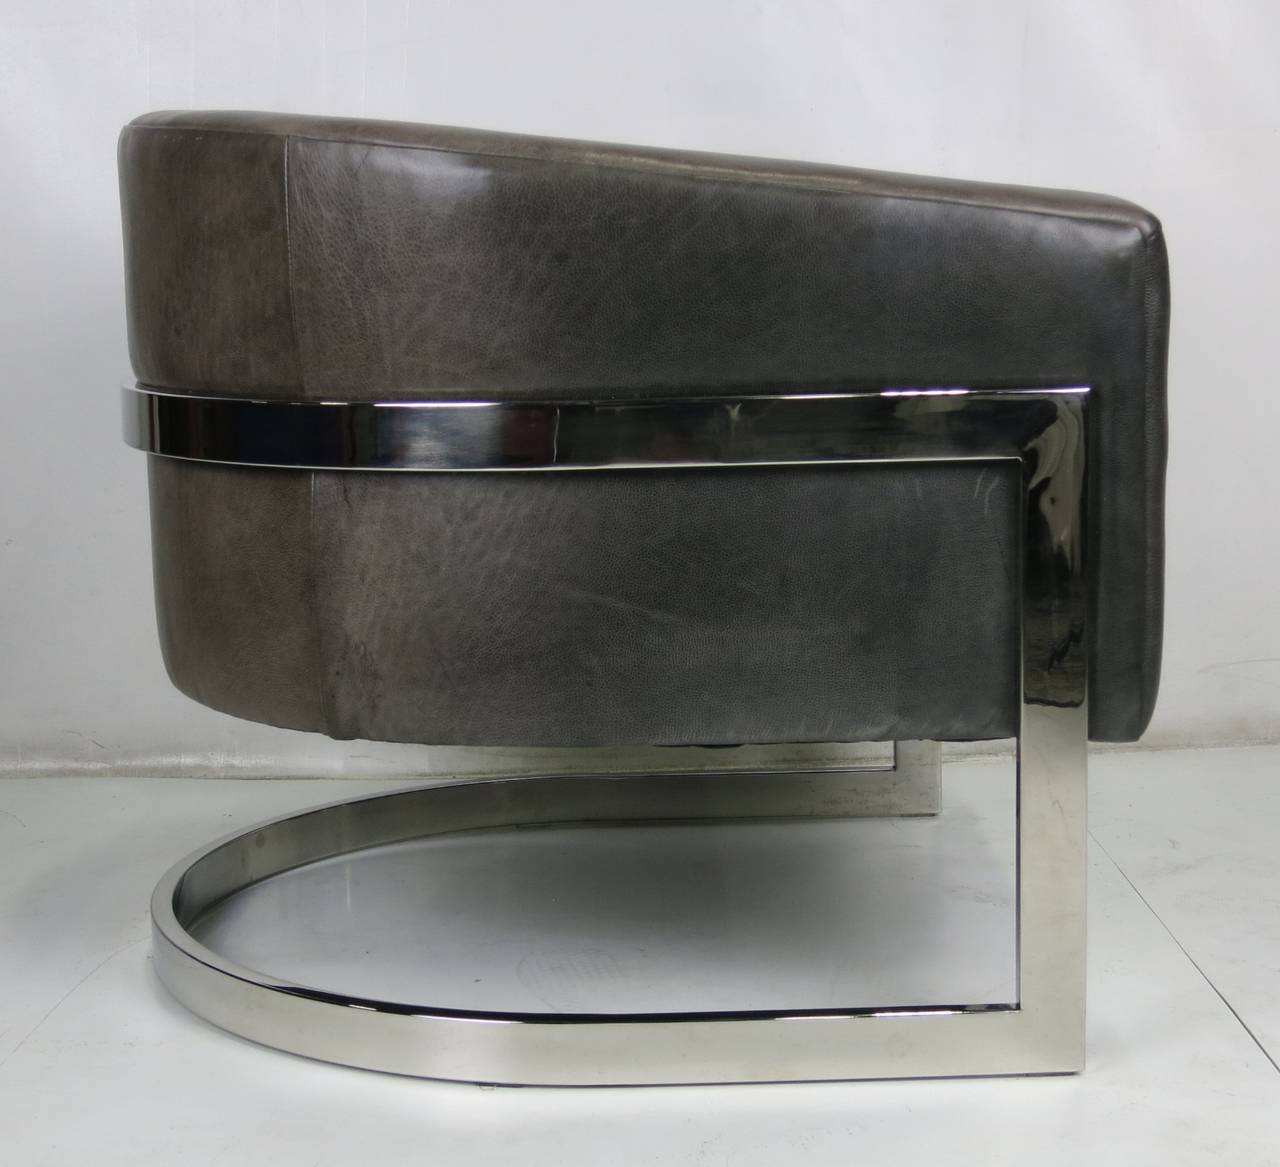 Fantastic pair of large-scale barrel form lounge chairs with wraparound chrome frame by Milo Baughman. The chairs are in excellent condition, recently upholstered in charcoal grey top grain leather. The chrome frames have also been re-plated and are